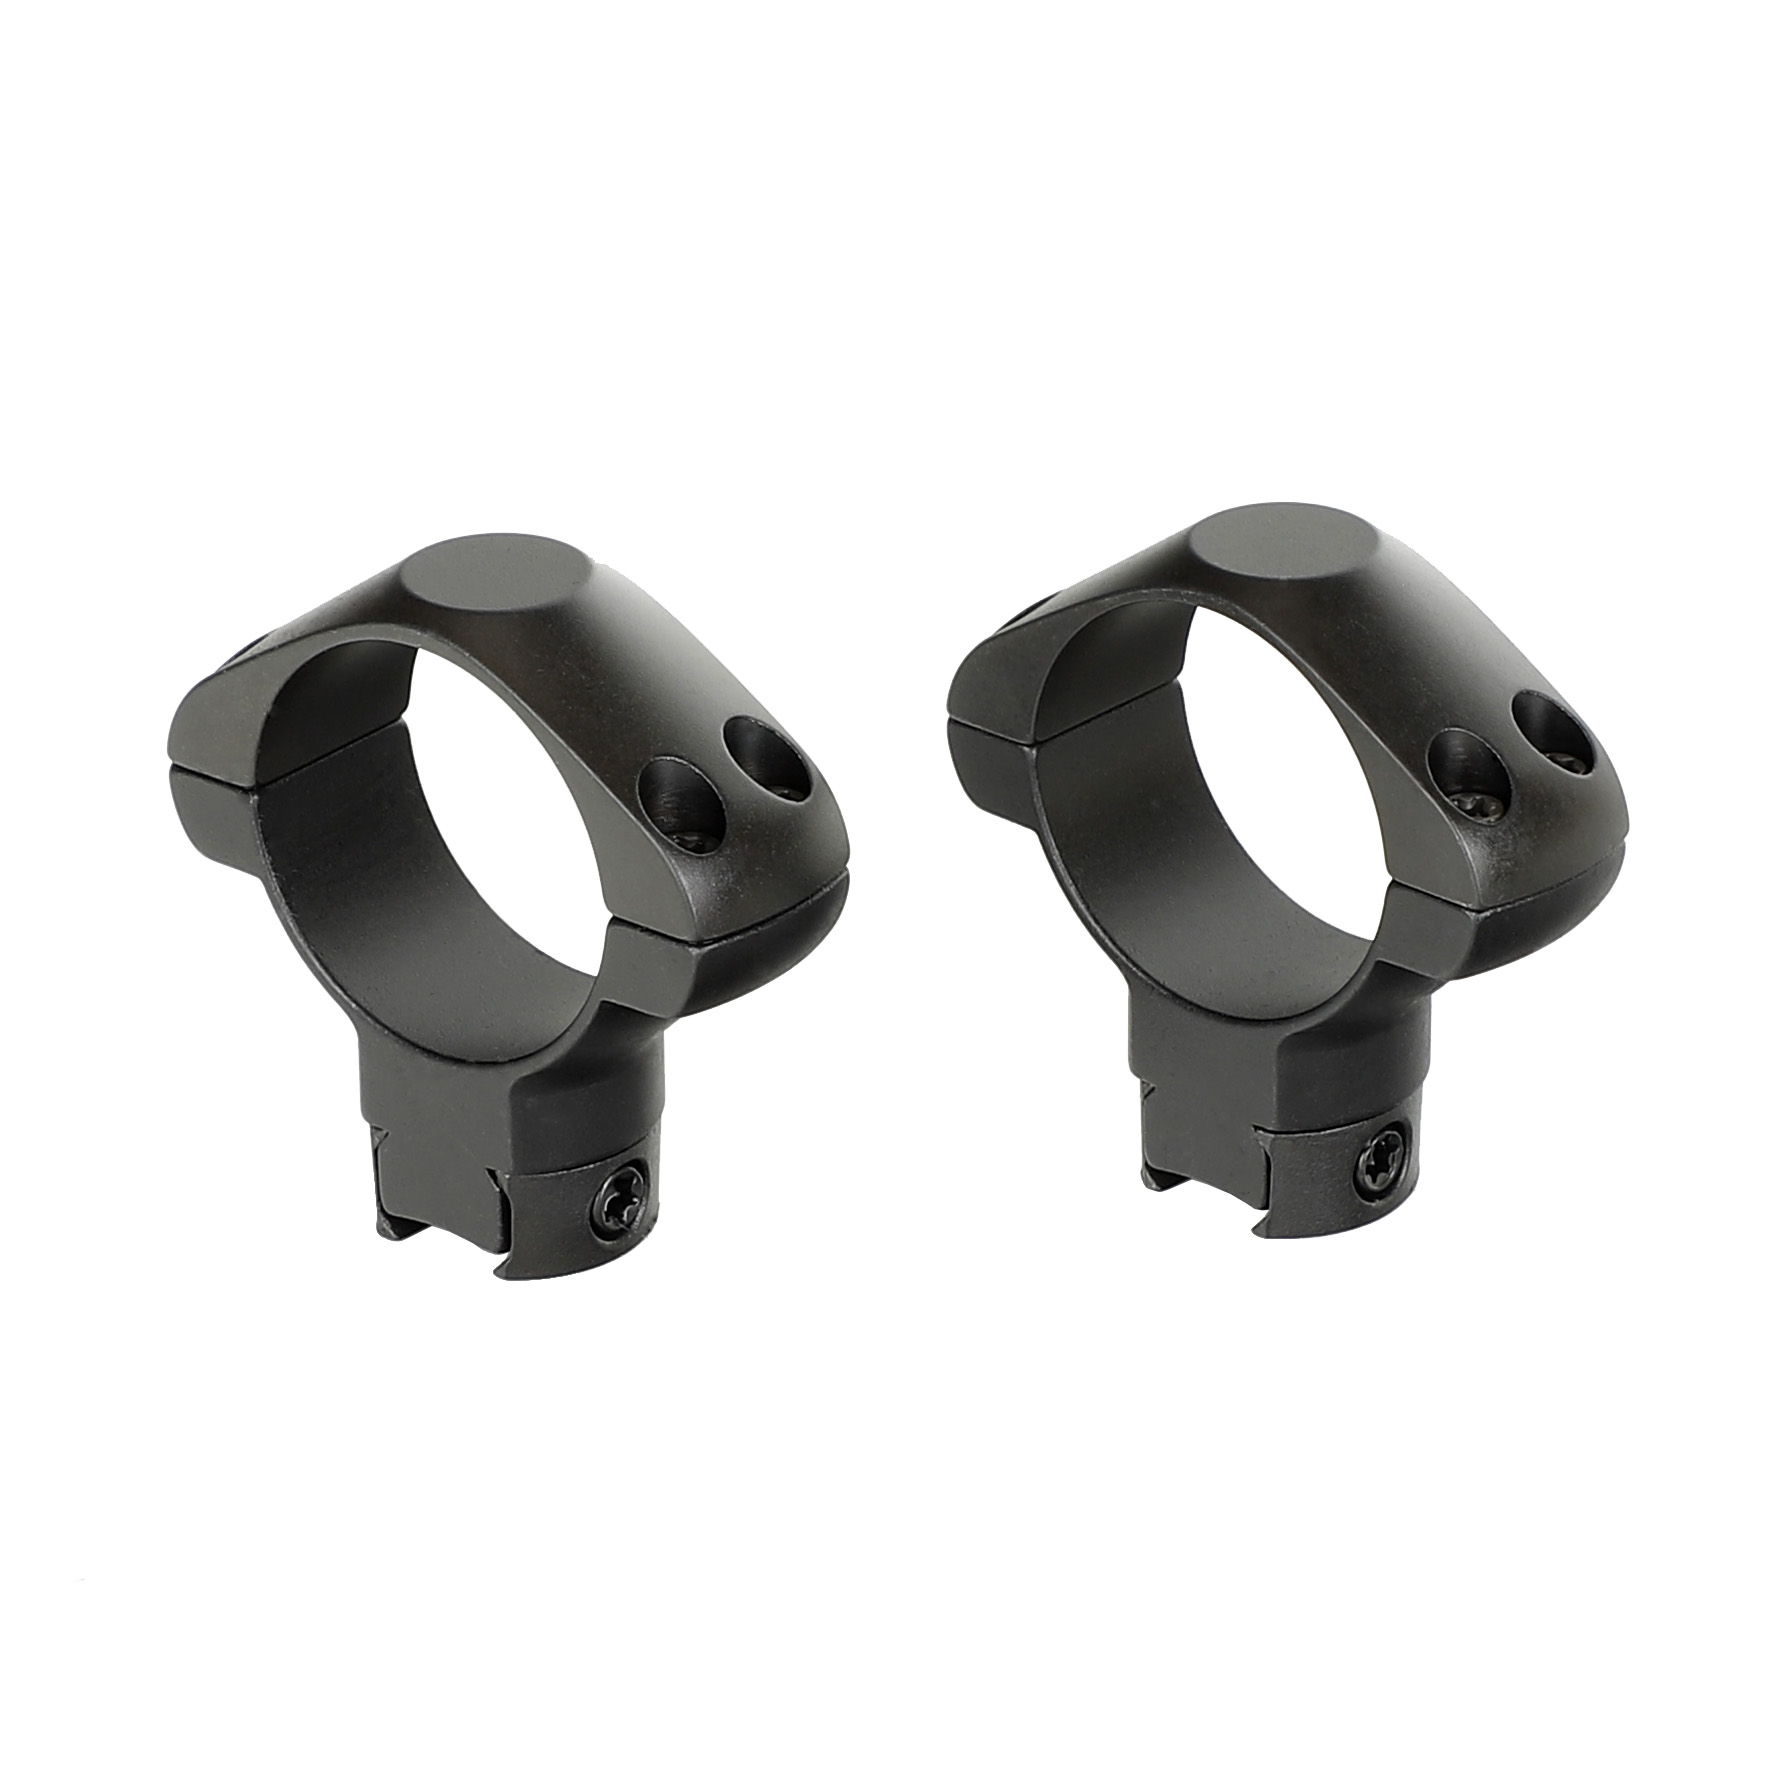 ohhunt 2PCs Tactical Steel Base Rings 30mm Tube 11mm Dovetail Rail Low High Medium Profile Scope Mount for Hunting Riflescope